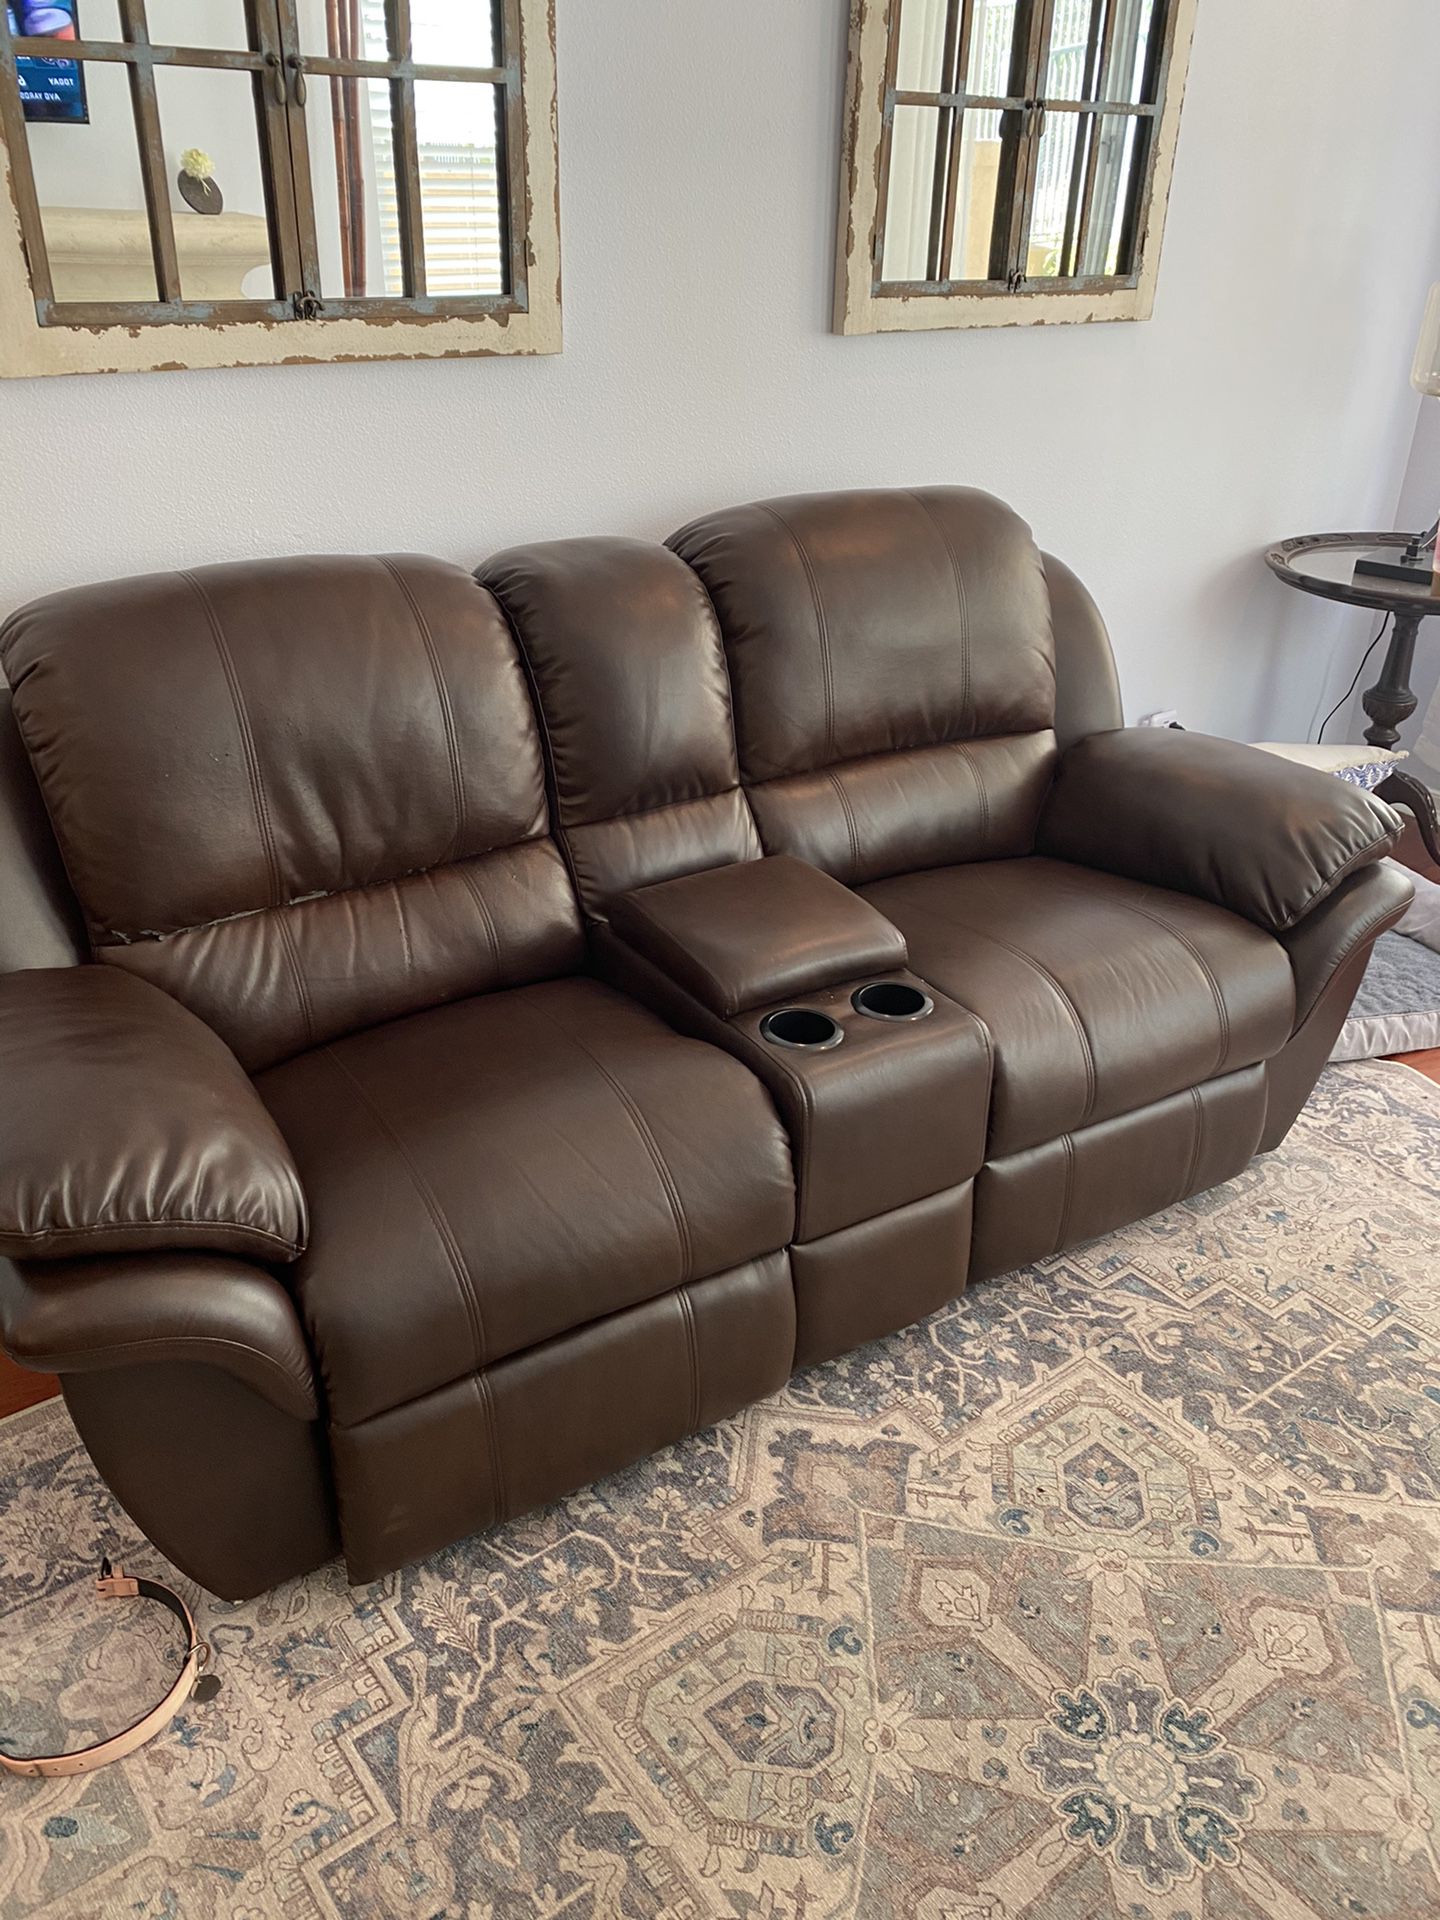 Couch with two recliners.